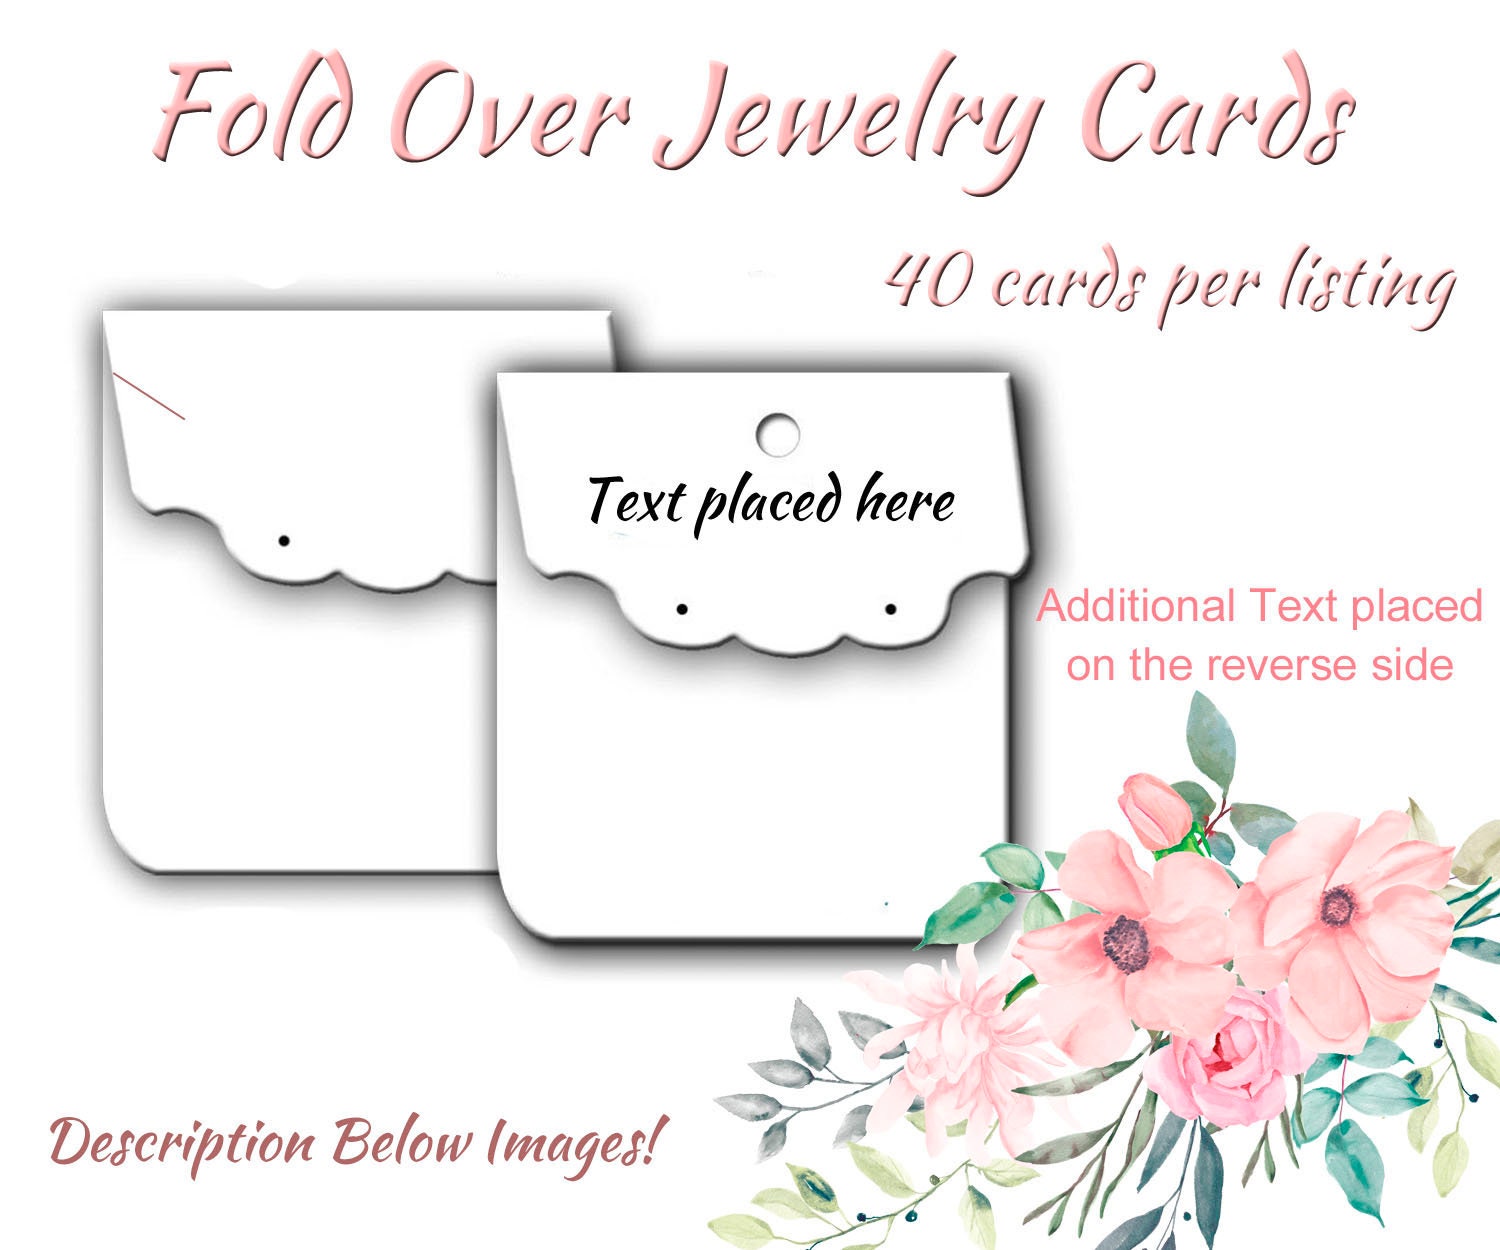 Template of Card for Earring 2.25x2x3 -   Earring cards template, Earring  cards, Earring card display